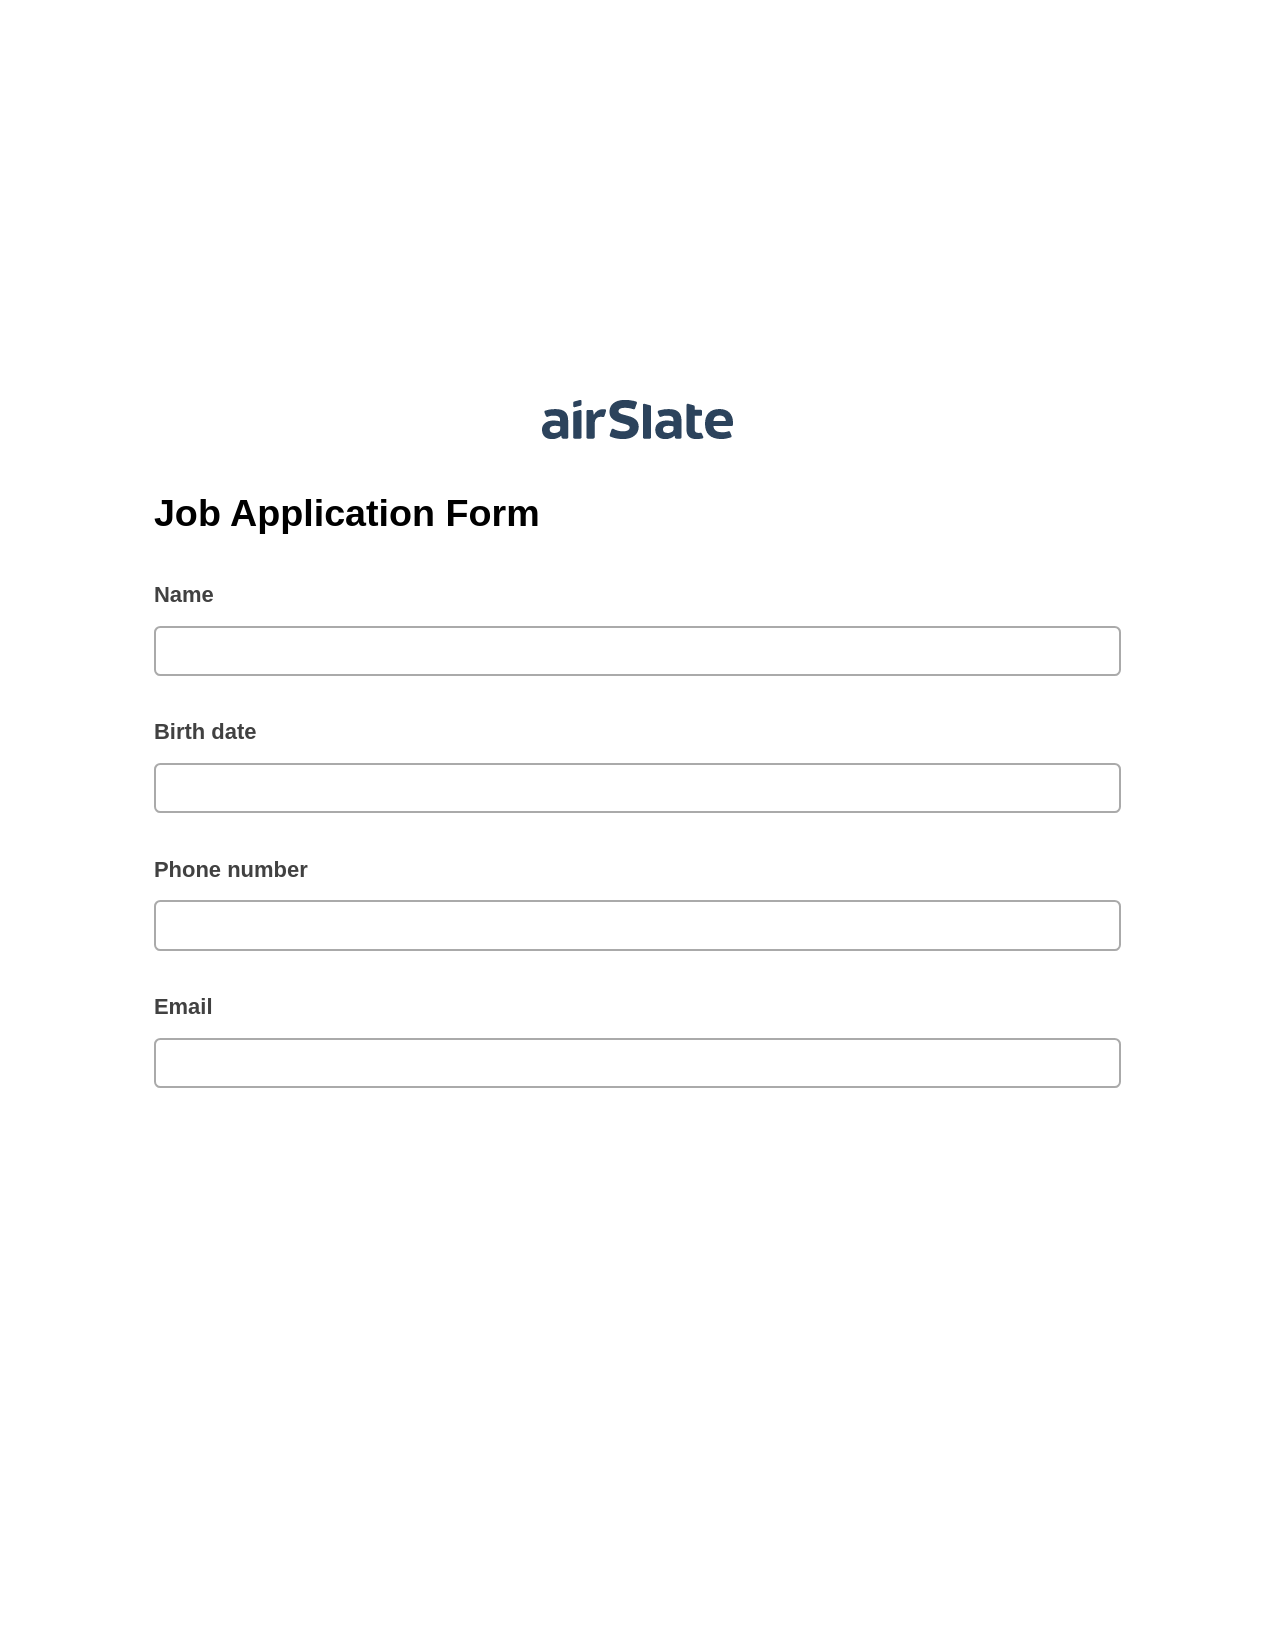 Job Application Form Pre-fill from Salesforce Record Bot, Update Salesforce Record Bot, Export to Excel 365 Bot